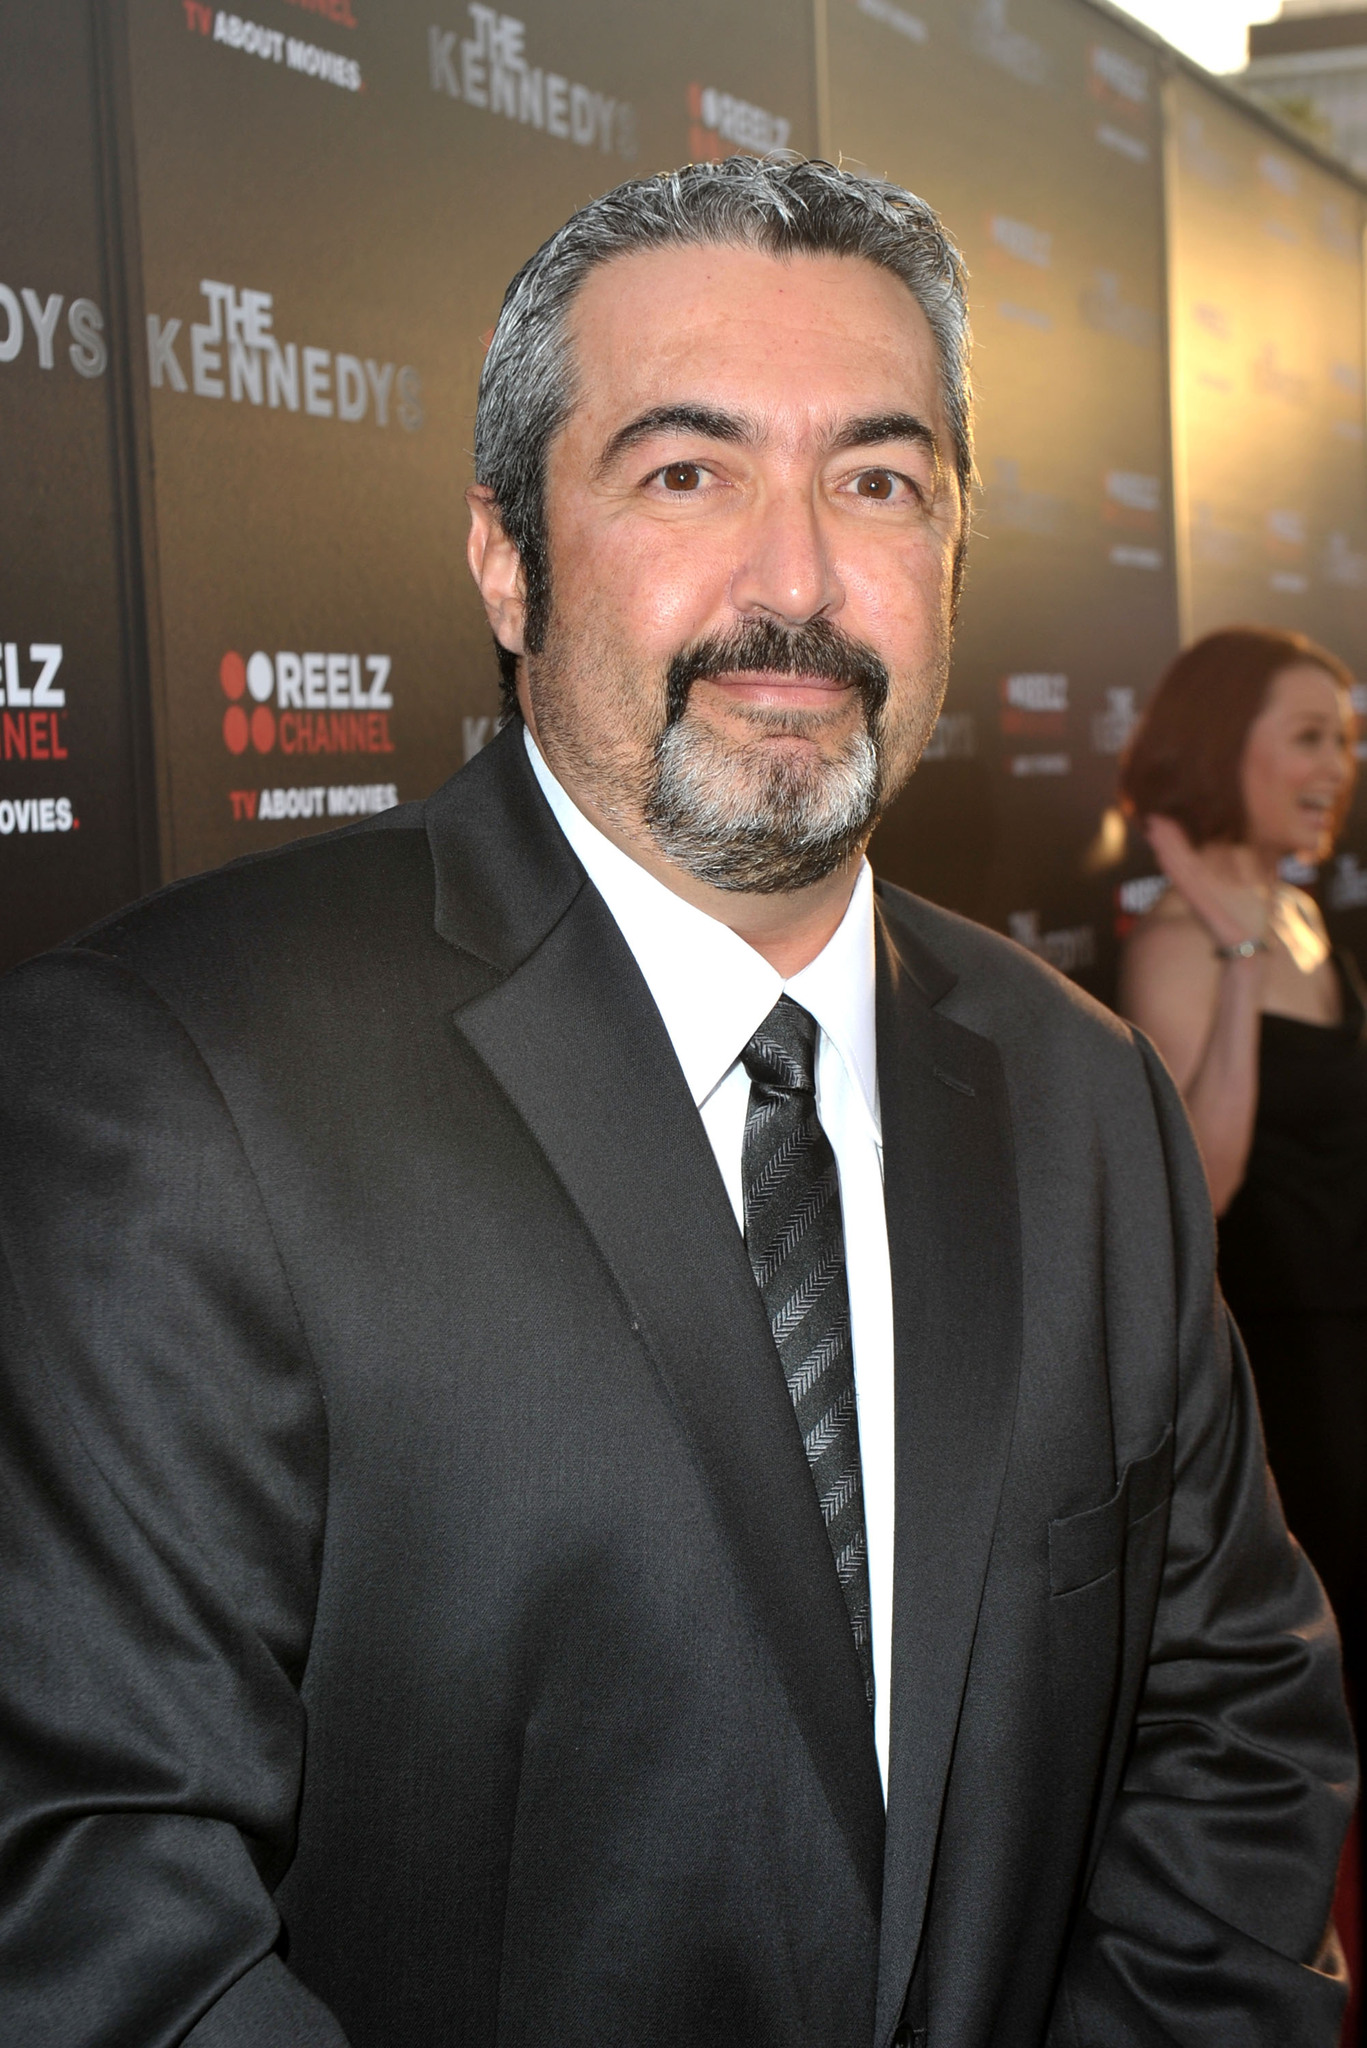 Jon Cassar at event of The Kennedys (2011)